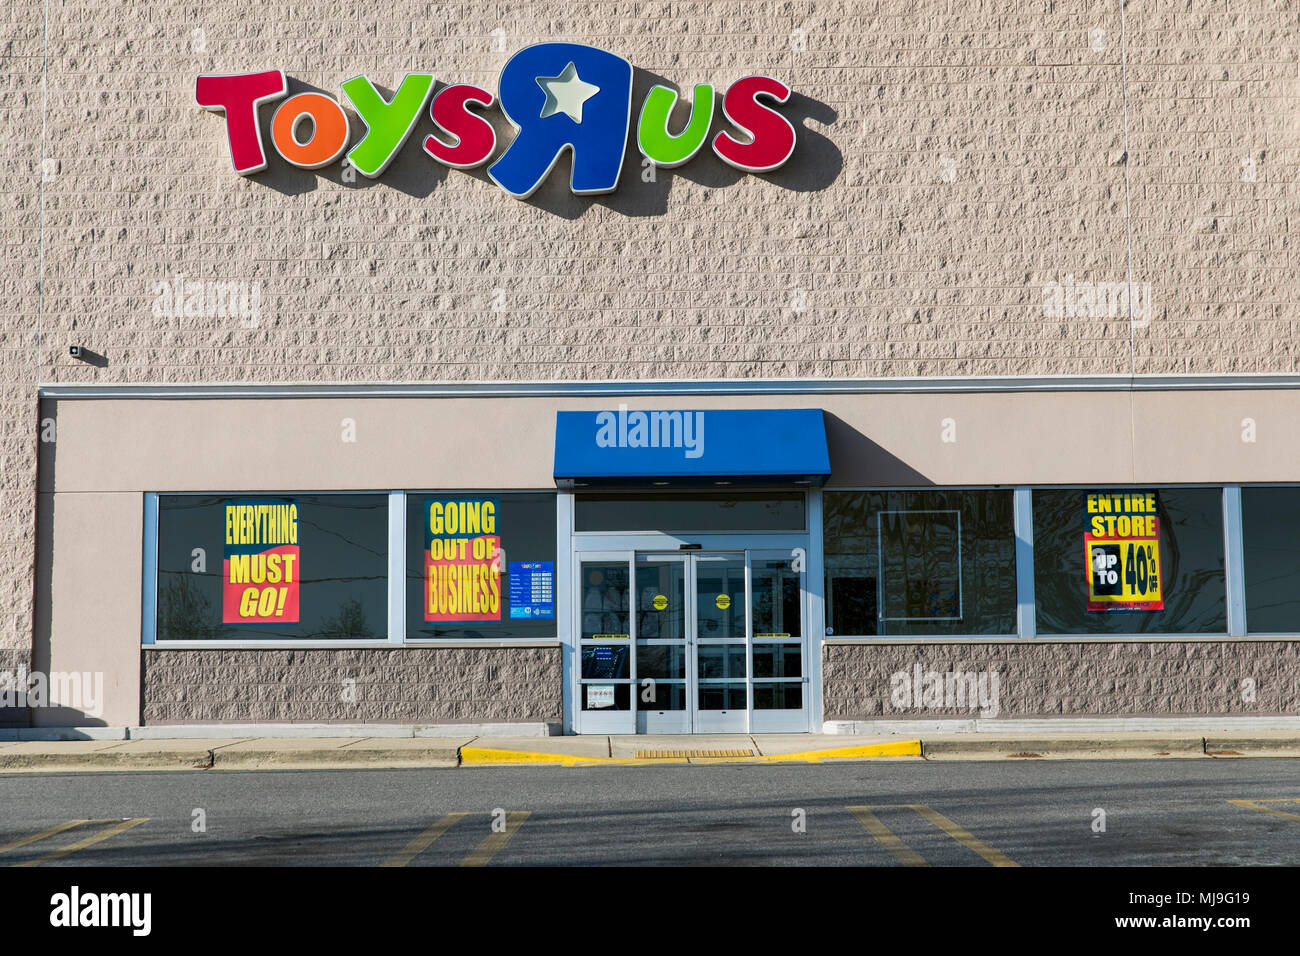 A logo sign outside of a joint Toys 'R' Us and Babies 'R' Us retail store in Annapolis, Maryland with 'Going Out Of Business' signage on April 29, 201 Stock Photo